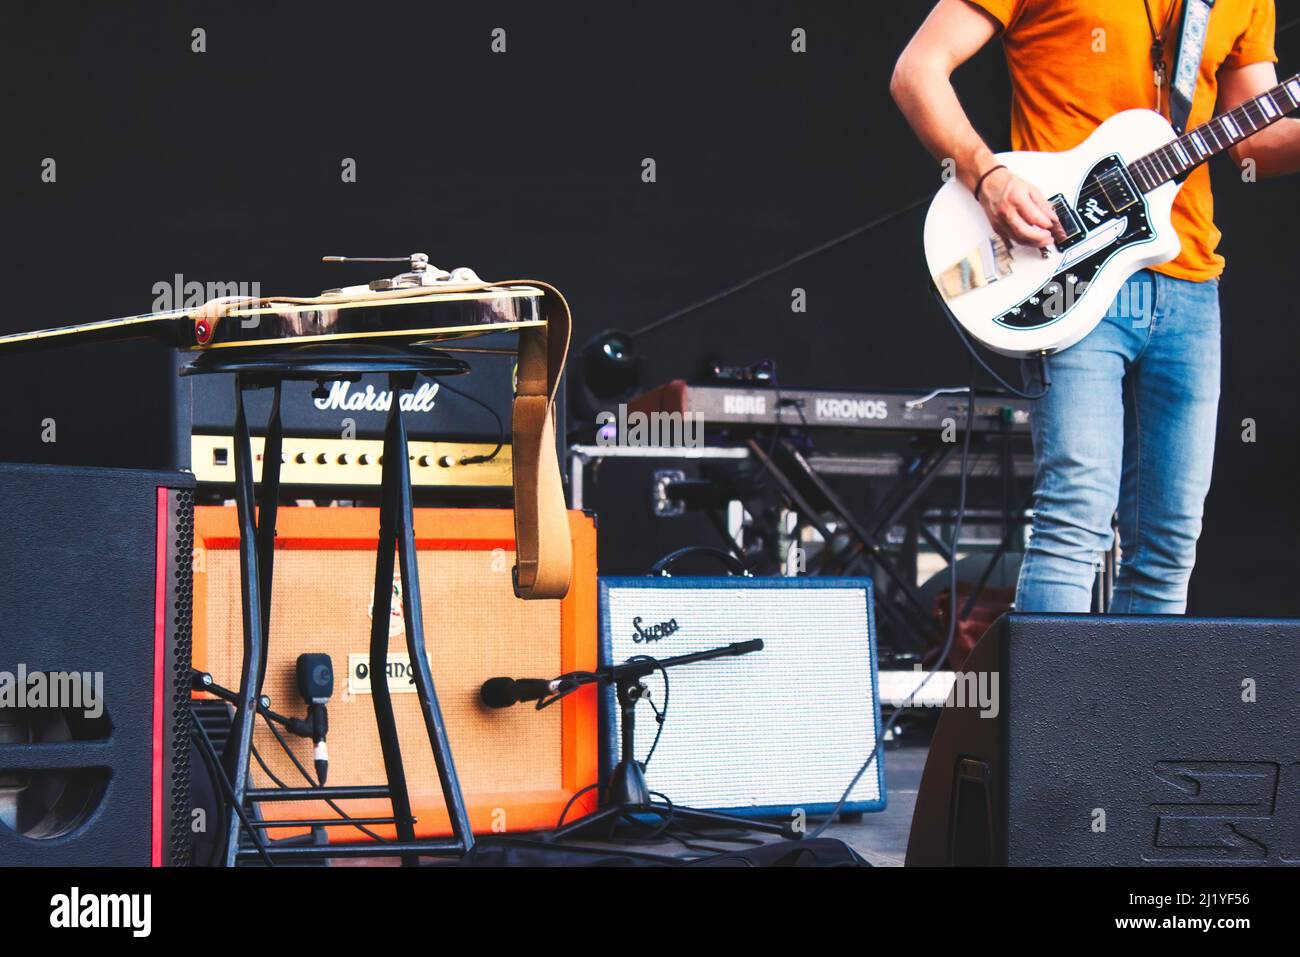 A guitarist on stage surrounded by musical equipment and electric guitar amplifiers Stock Photo